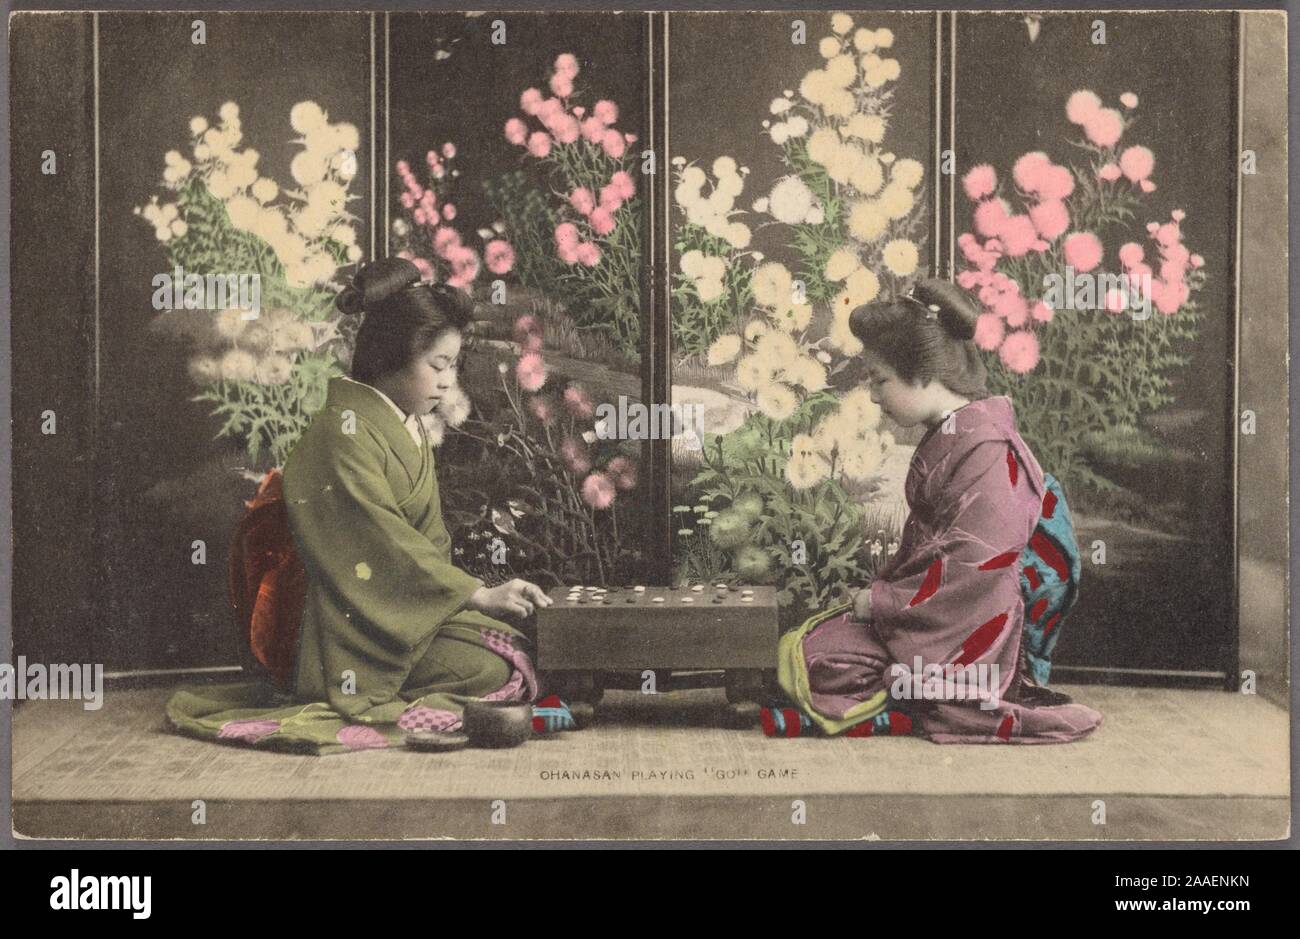 Illustrated postcard of two Japanese women (o-hana-san), wearing traditional Japanese kimono, kneeling on the floor playing the board game called go, with a floral screen behind them, Japan, 1920. From the New York Public Library. () Stock Photo